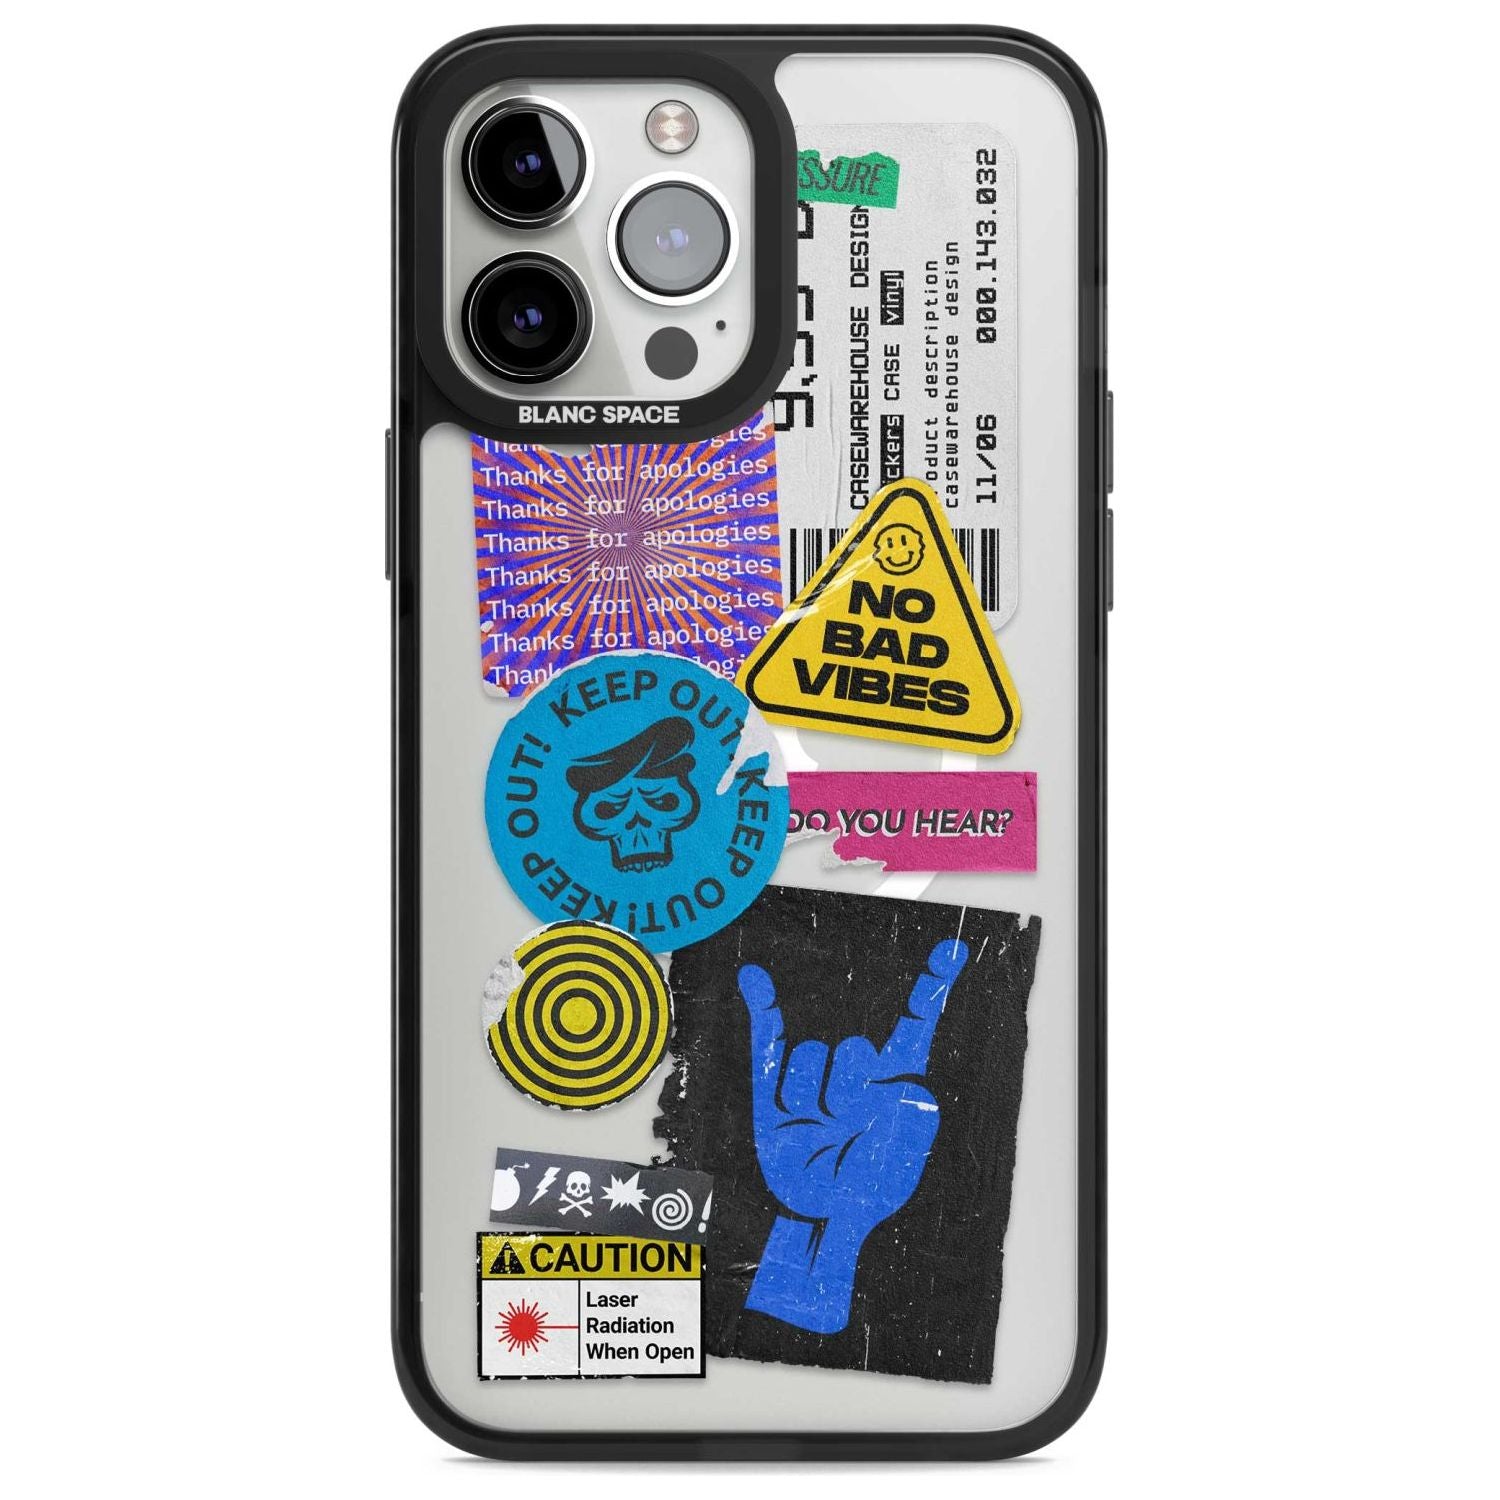 No Bad Vibes Sticker Mix Phone Case iPhone 13 Pro Max / Magsafe Black Impact Case Blanc Space